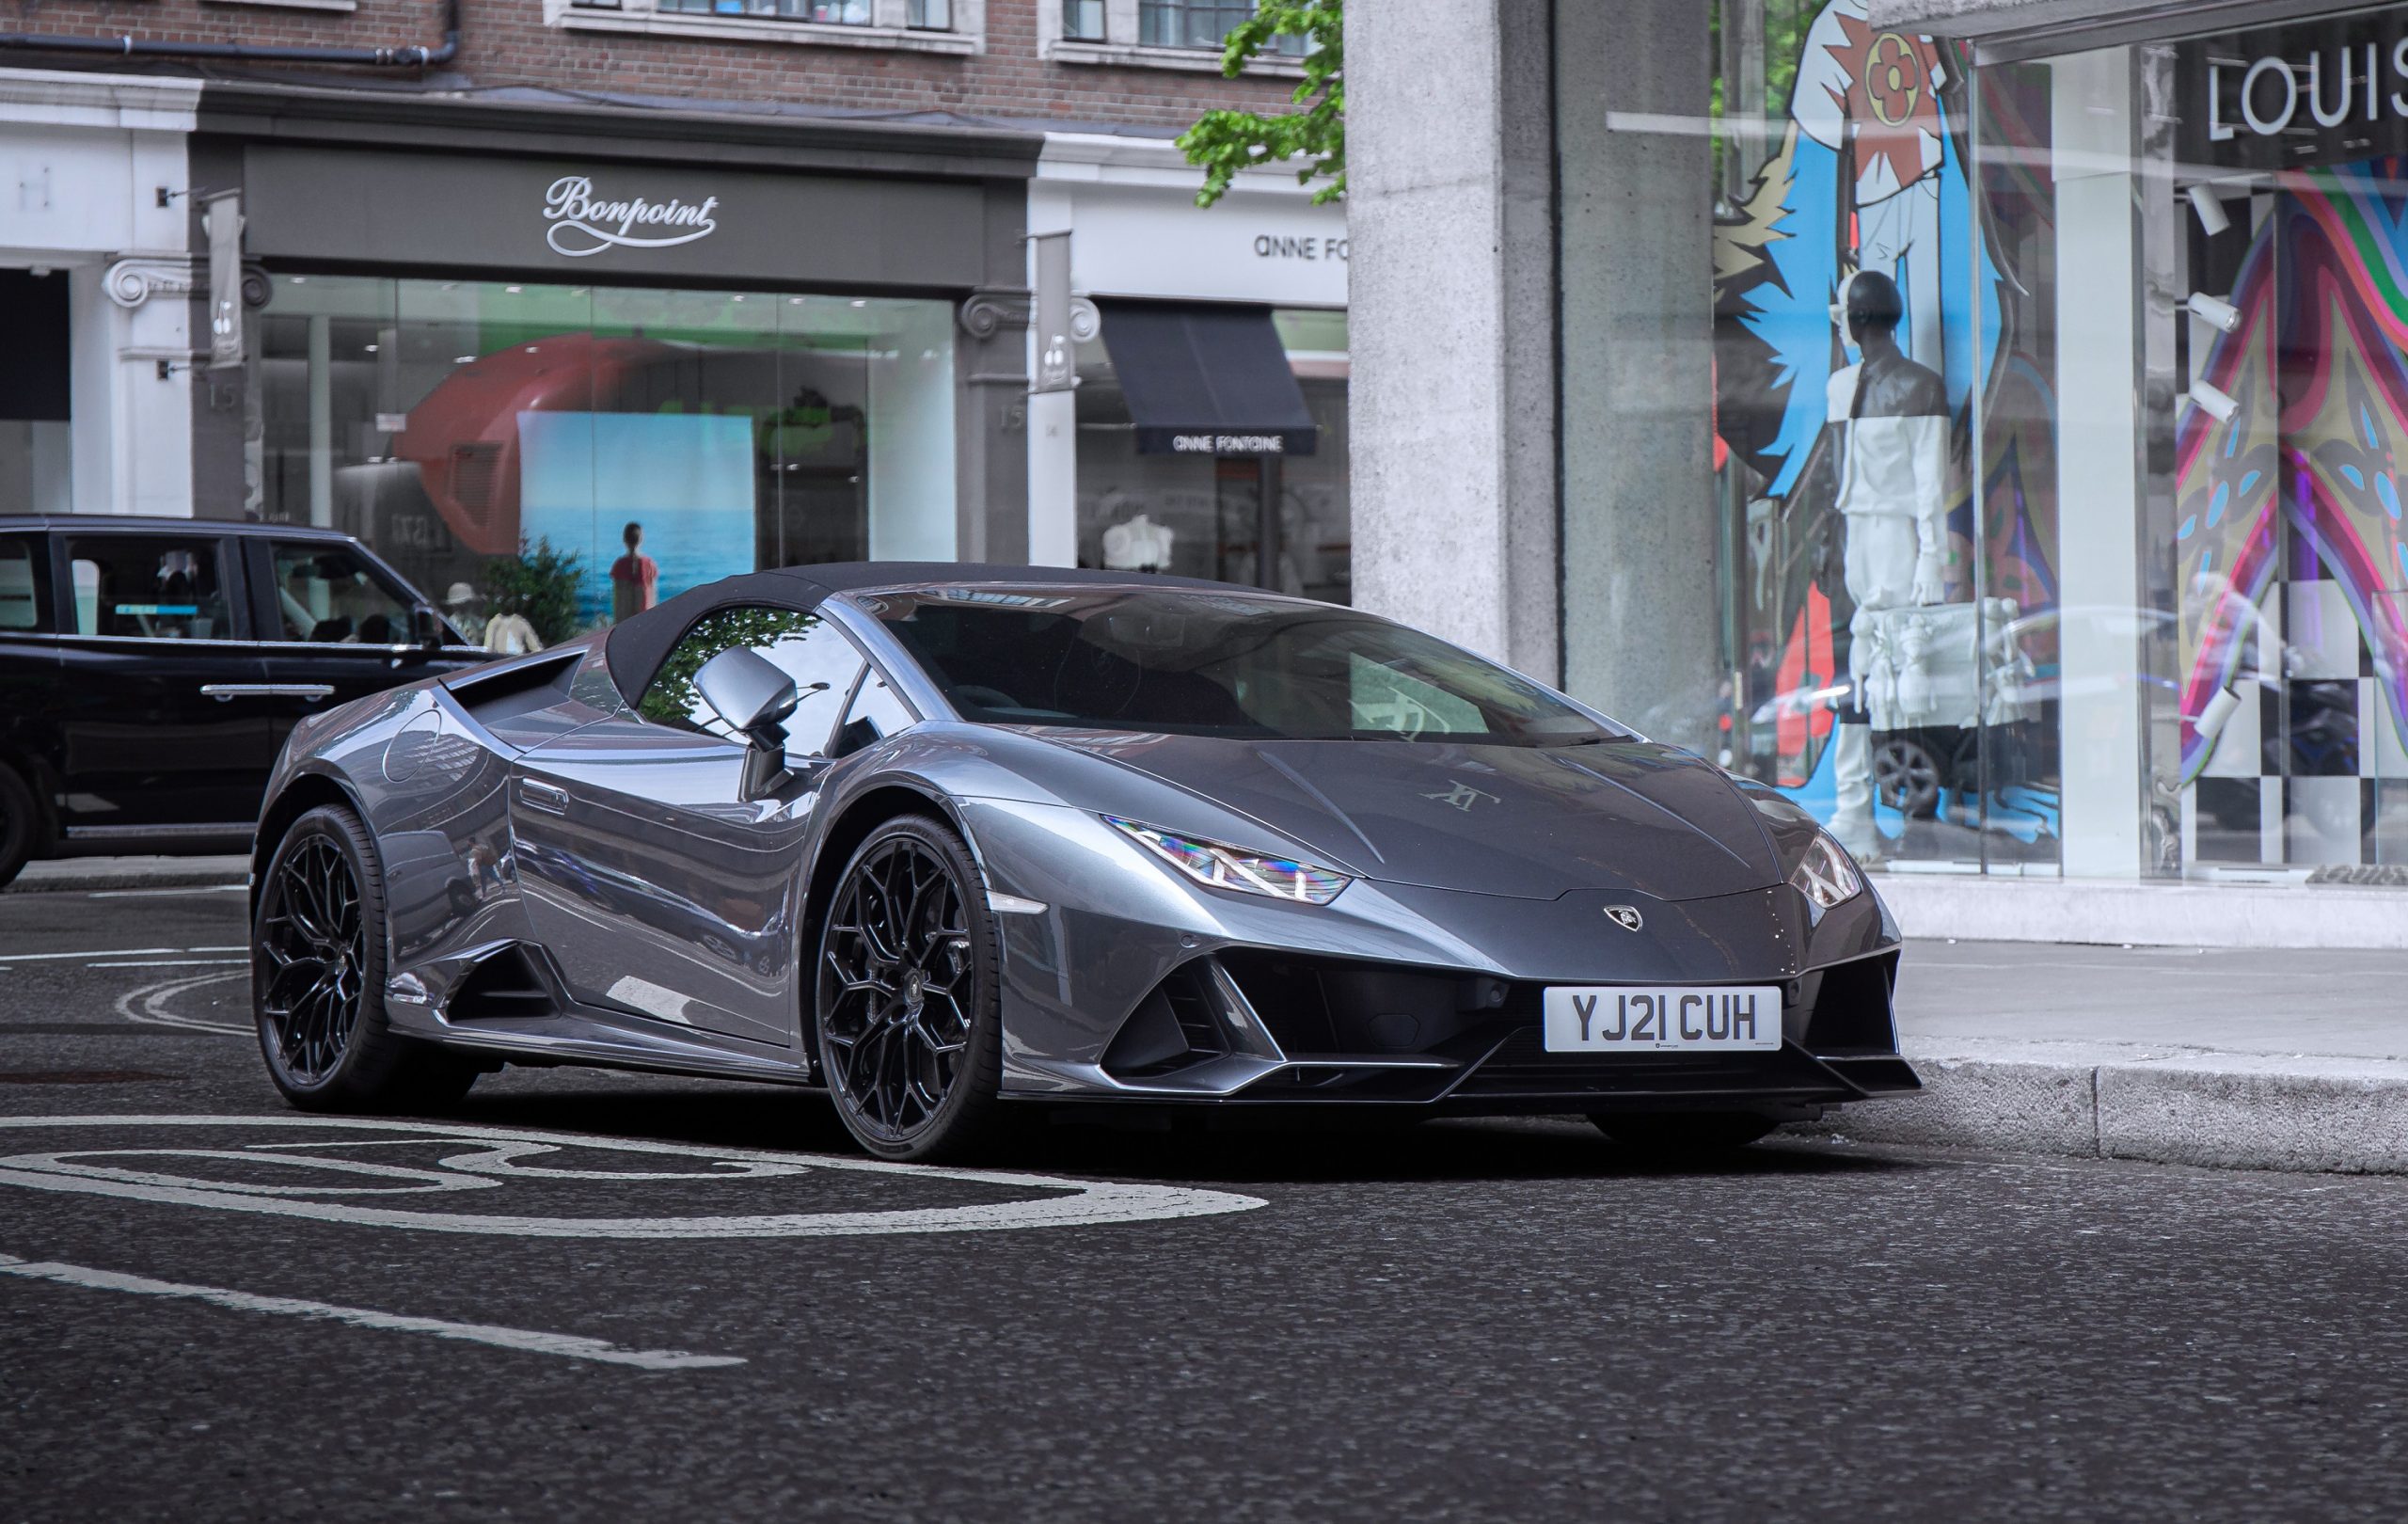 New cars like this grey Lamborghini Huracan, shot from the front 3/4 are heavily discounted for the wealthy